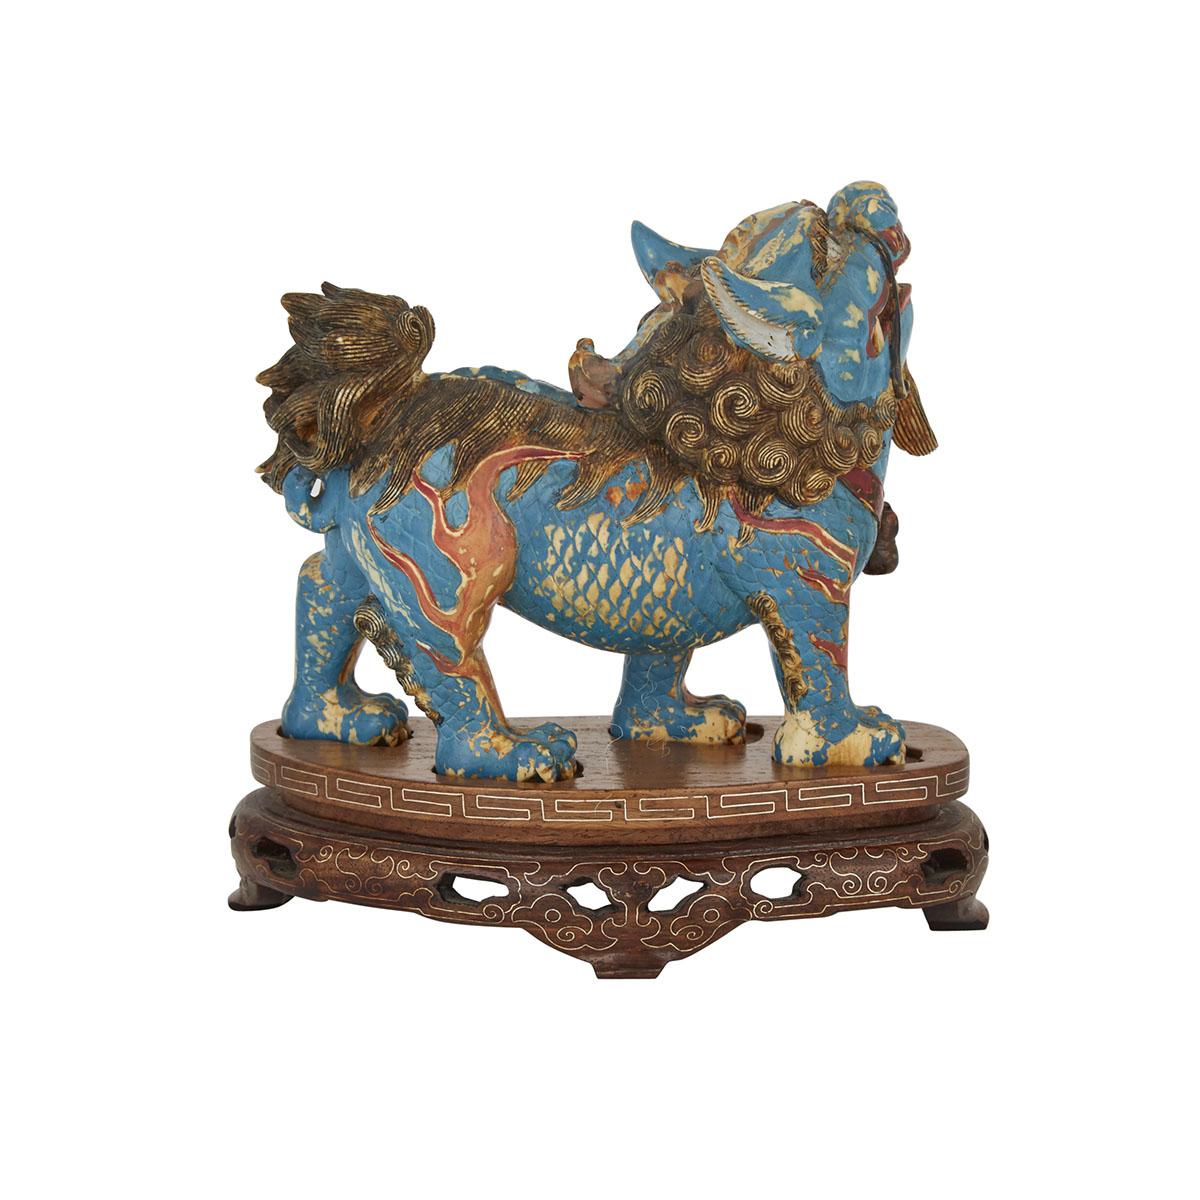 A CARVED POLYCHROMED IVORY QILIN, 19TH CENTURY 清十九世紀 牙雕加彩麒麟 The beast finely carved, standing - Image 2 of 2